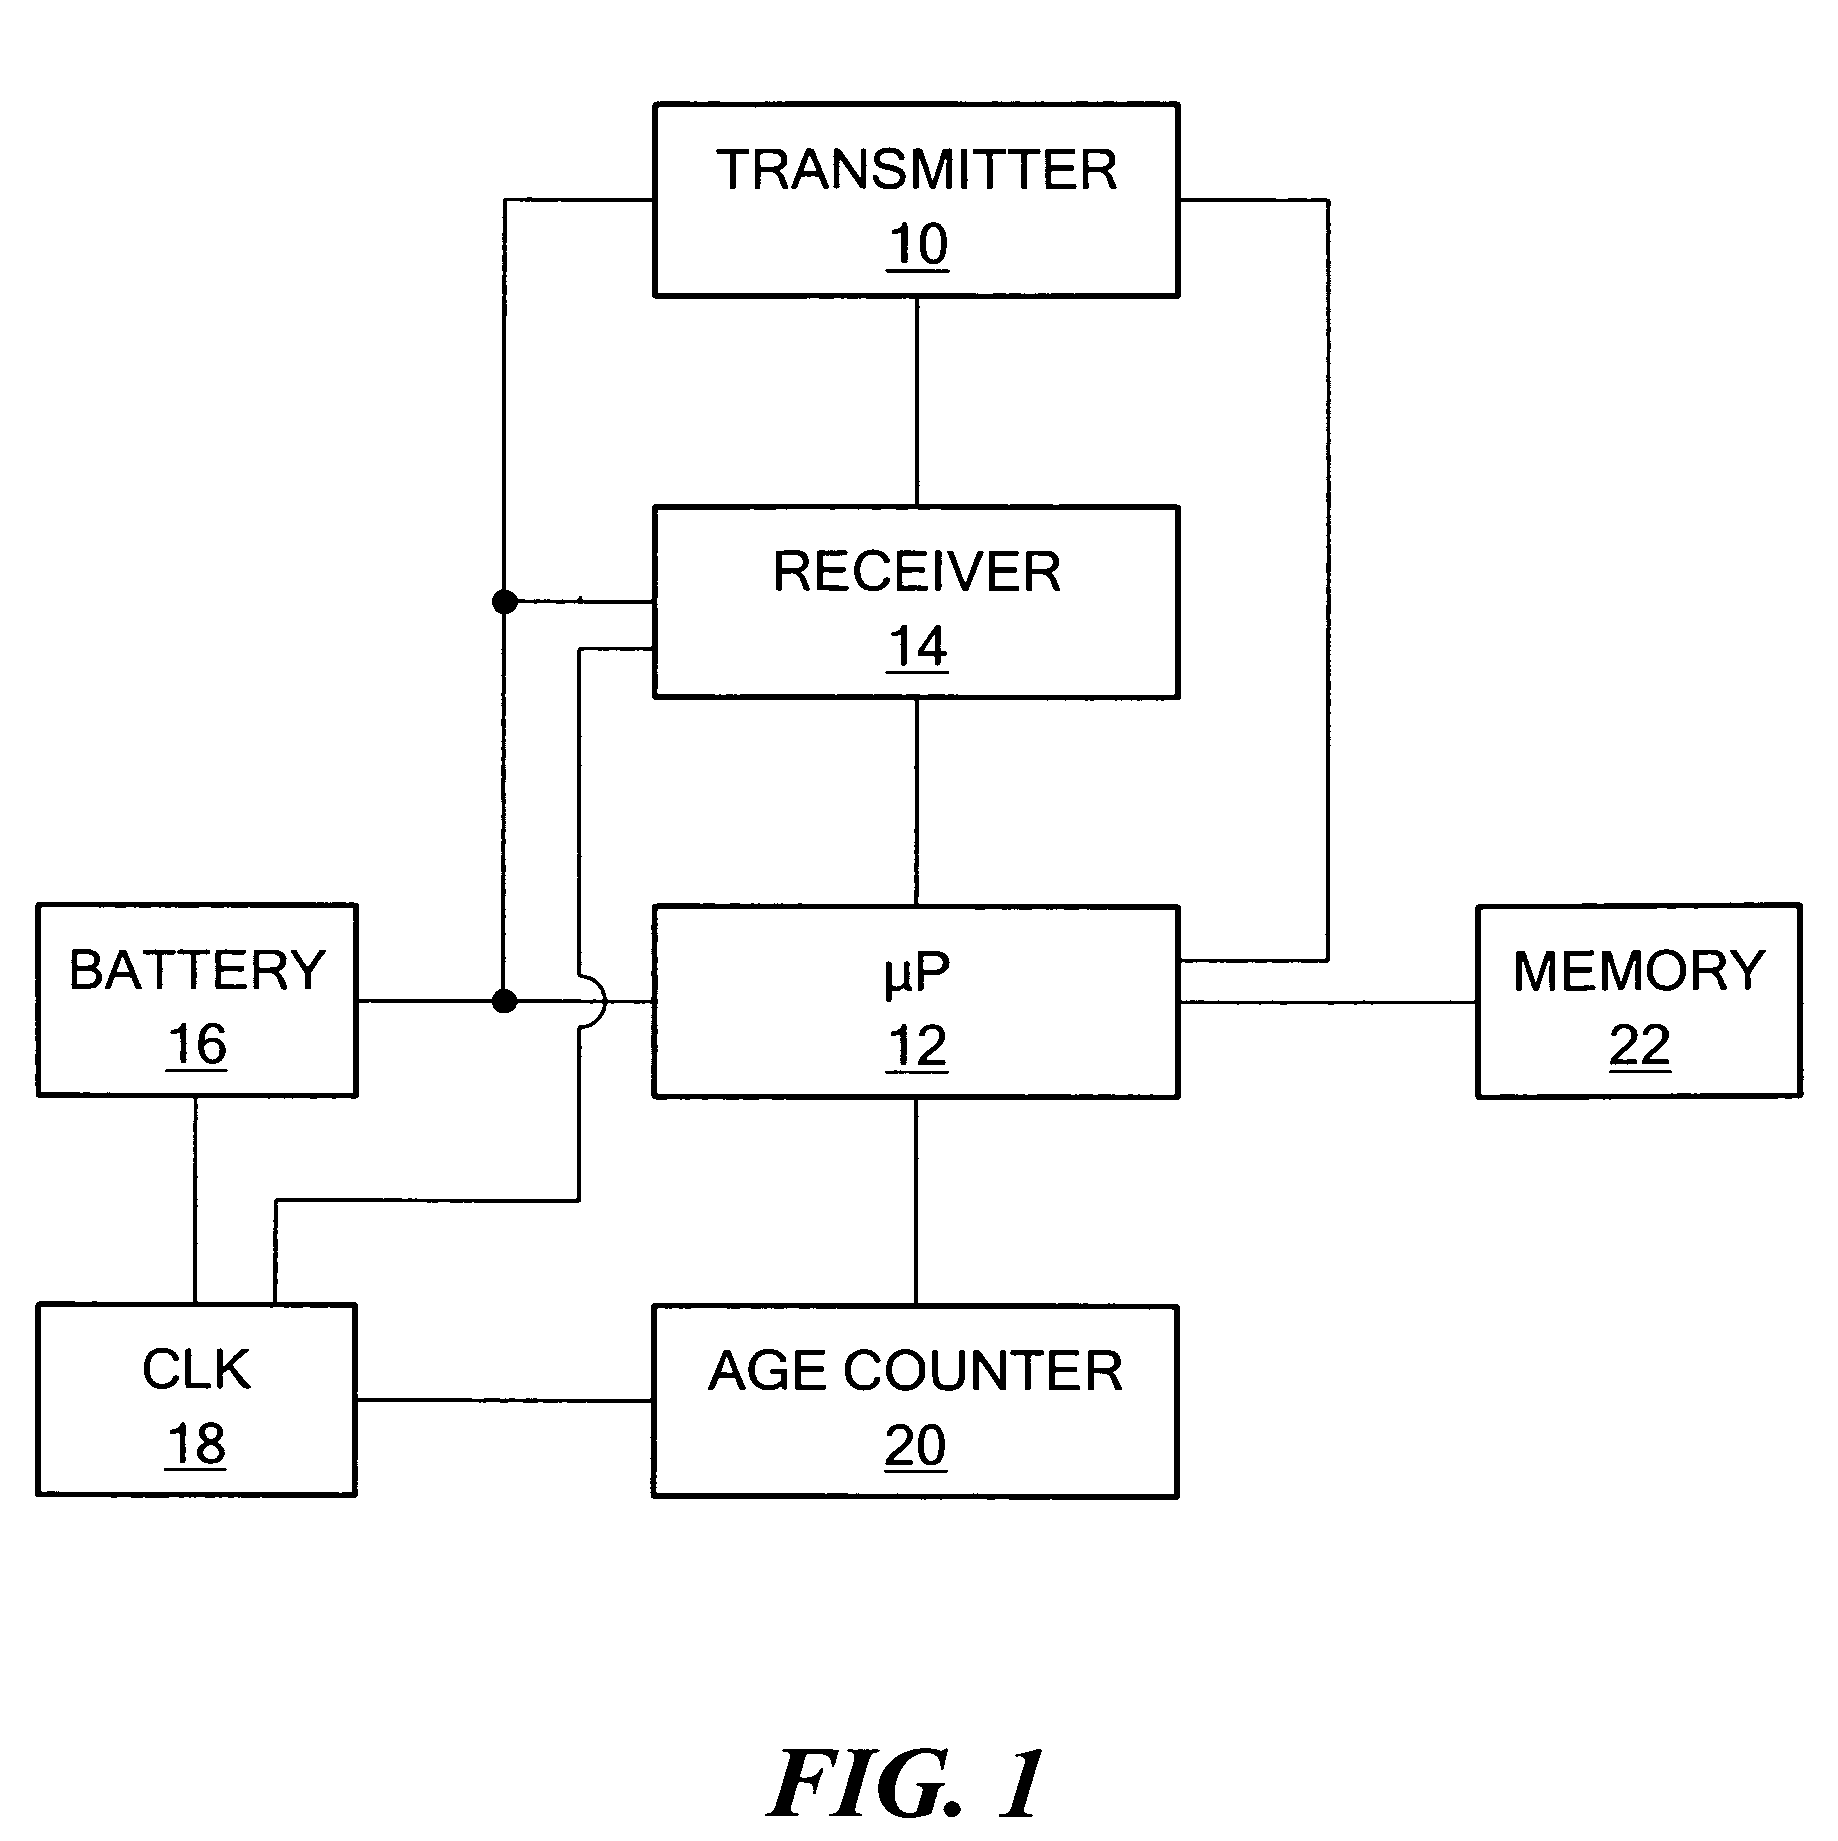 Duty cycle estimation system and method